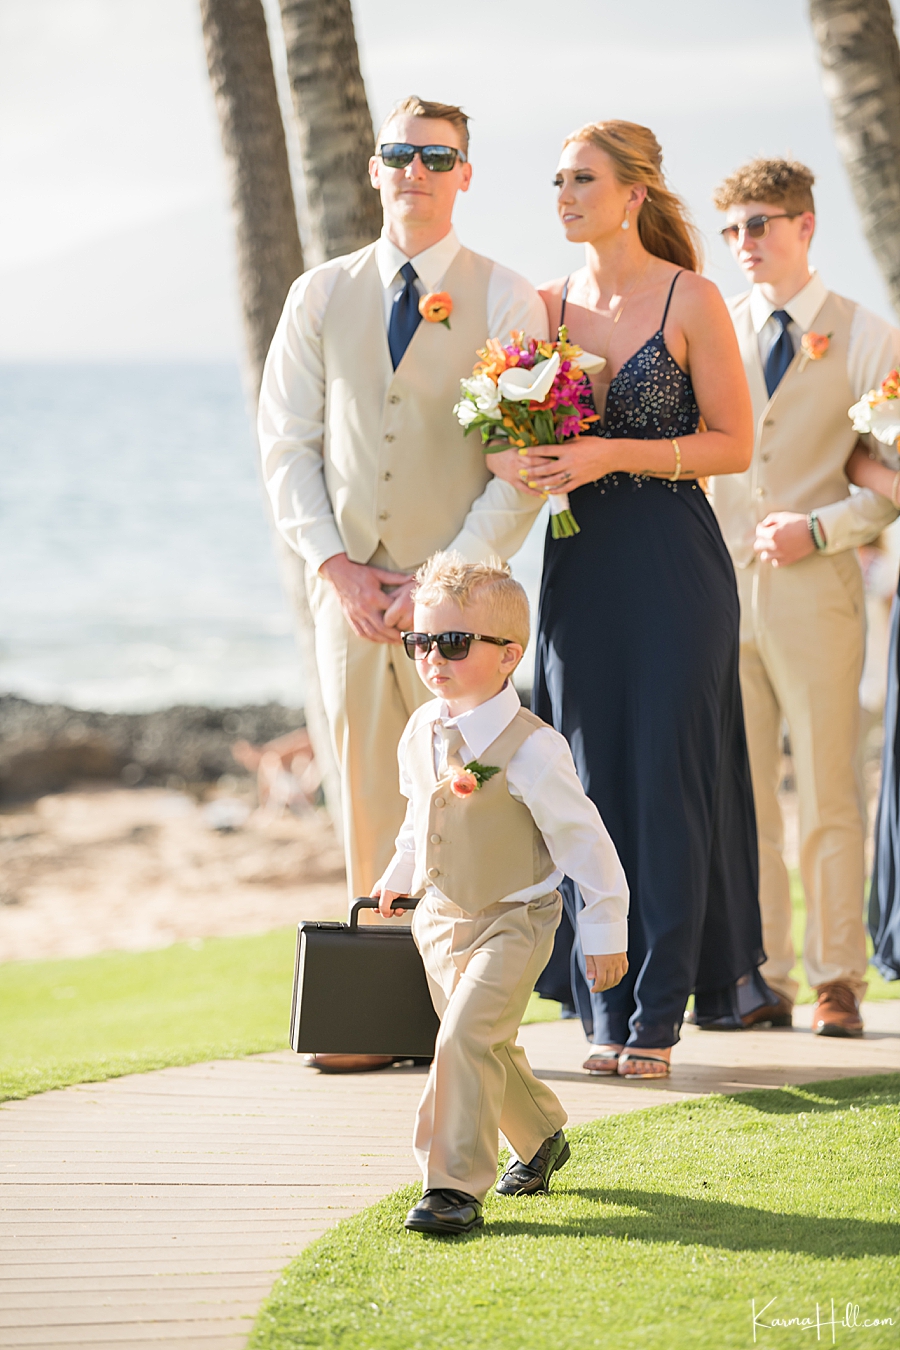 cute ring bearer walks down the aisle for a beach wedding wearing sunglasses and holding a briefcase like a spy 